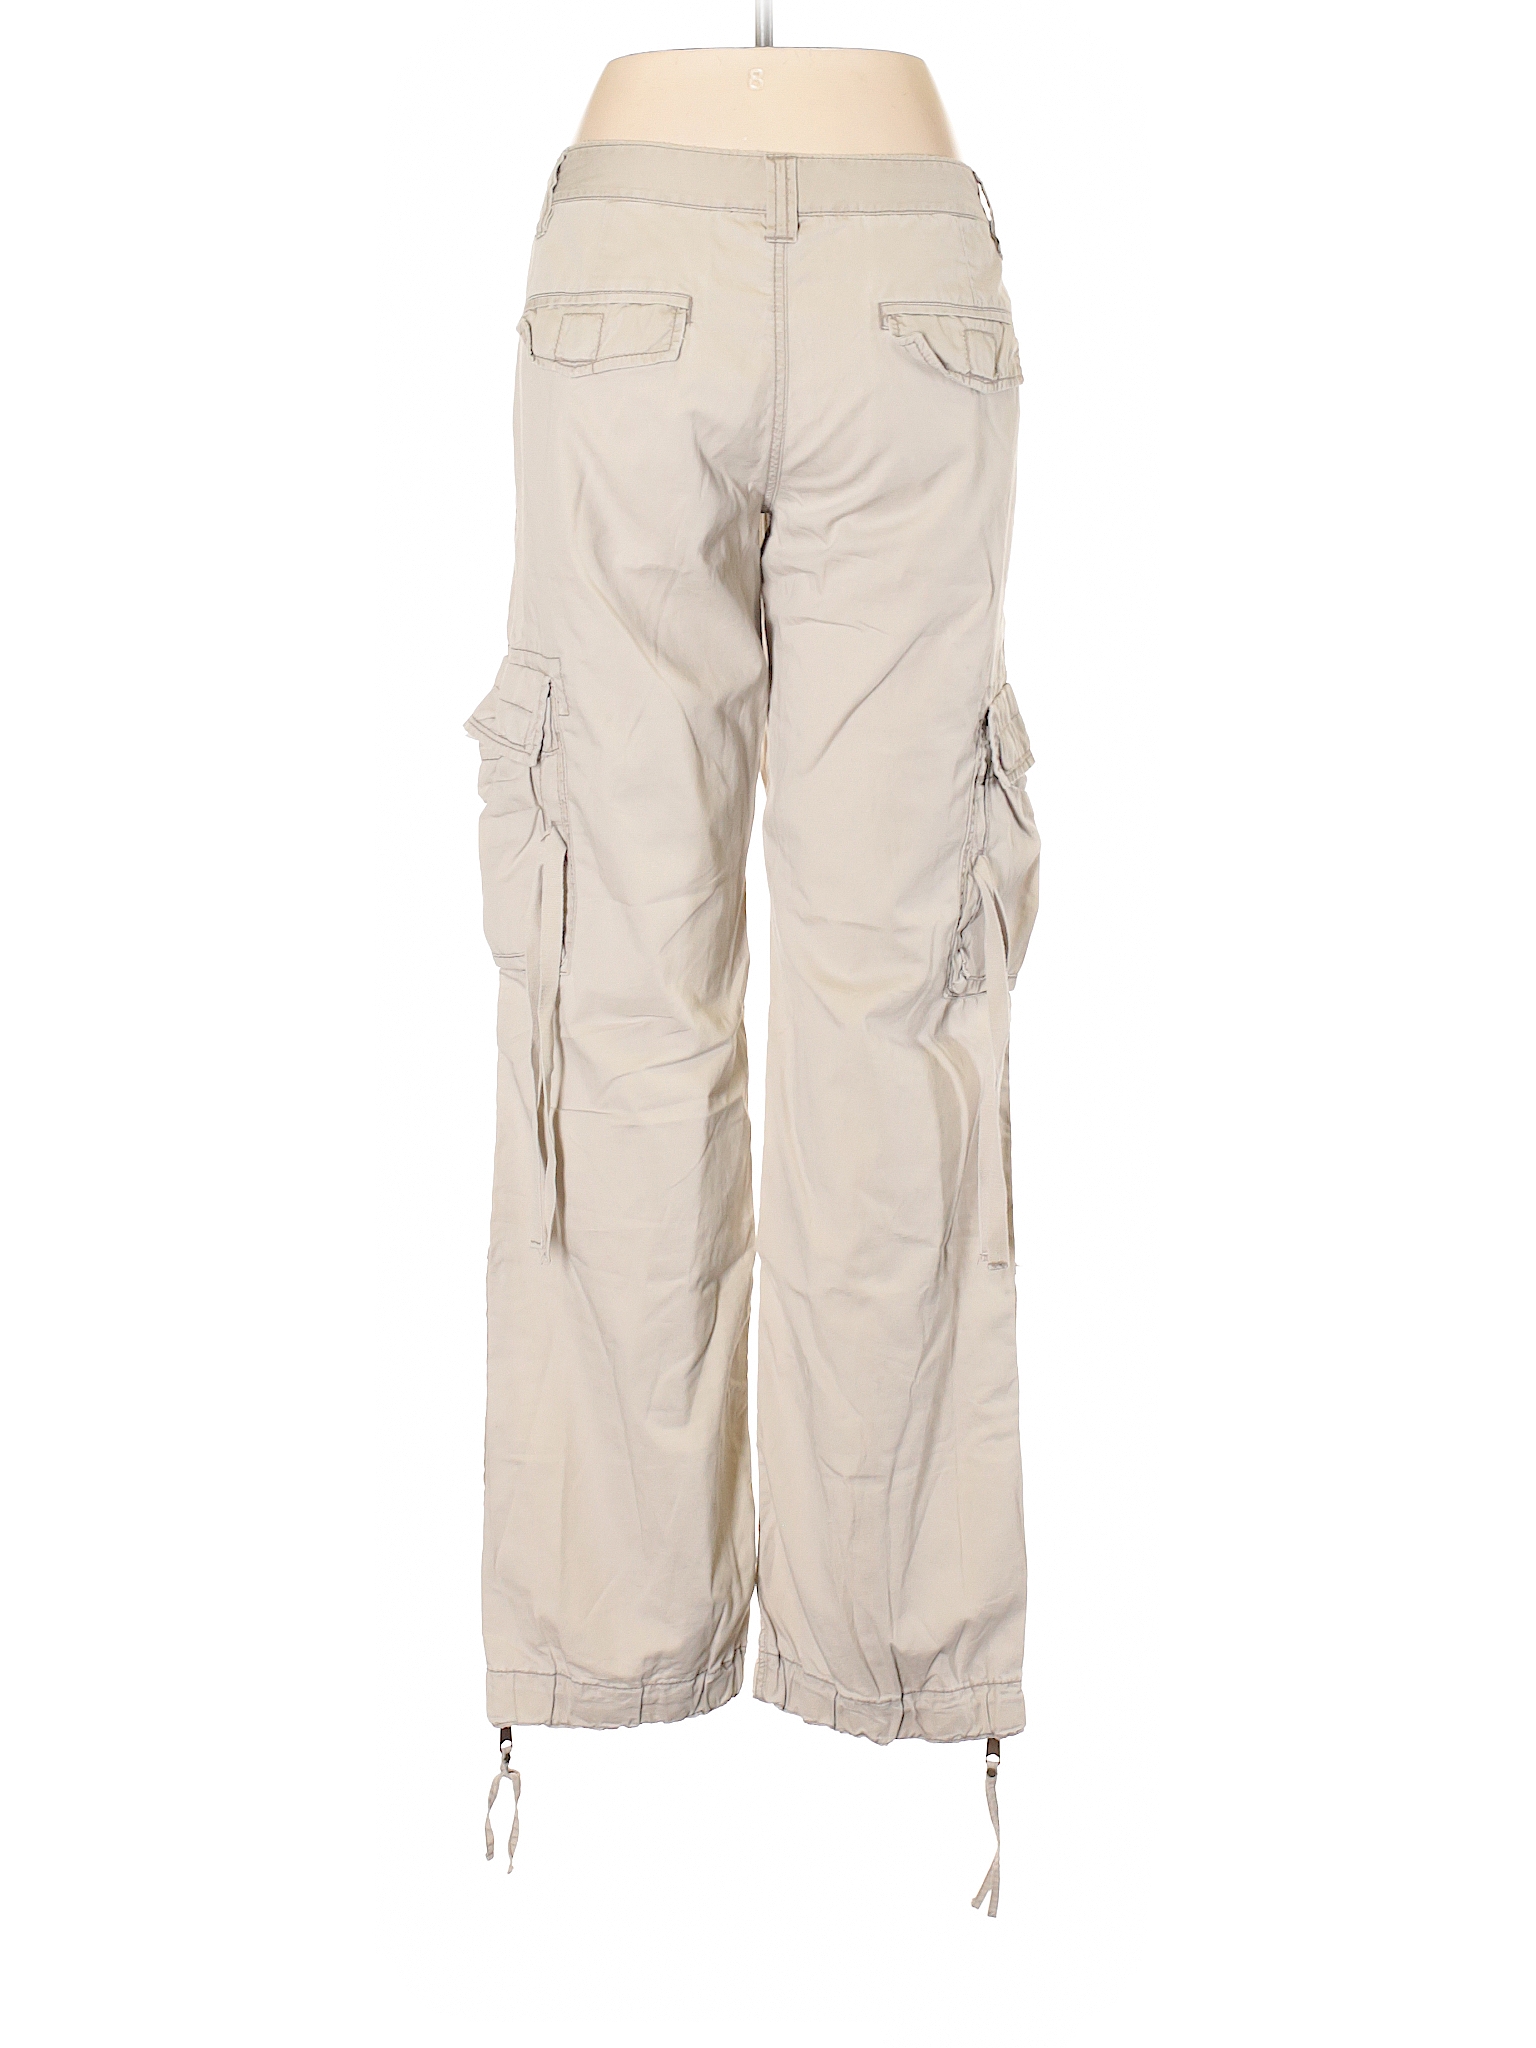 American Eagle Outfitters 100% Cotton Solid Beige Cargo Pants Size 10 - 68%  off